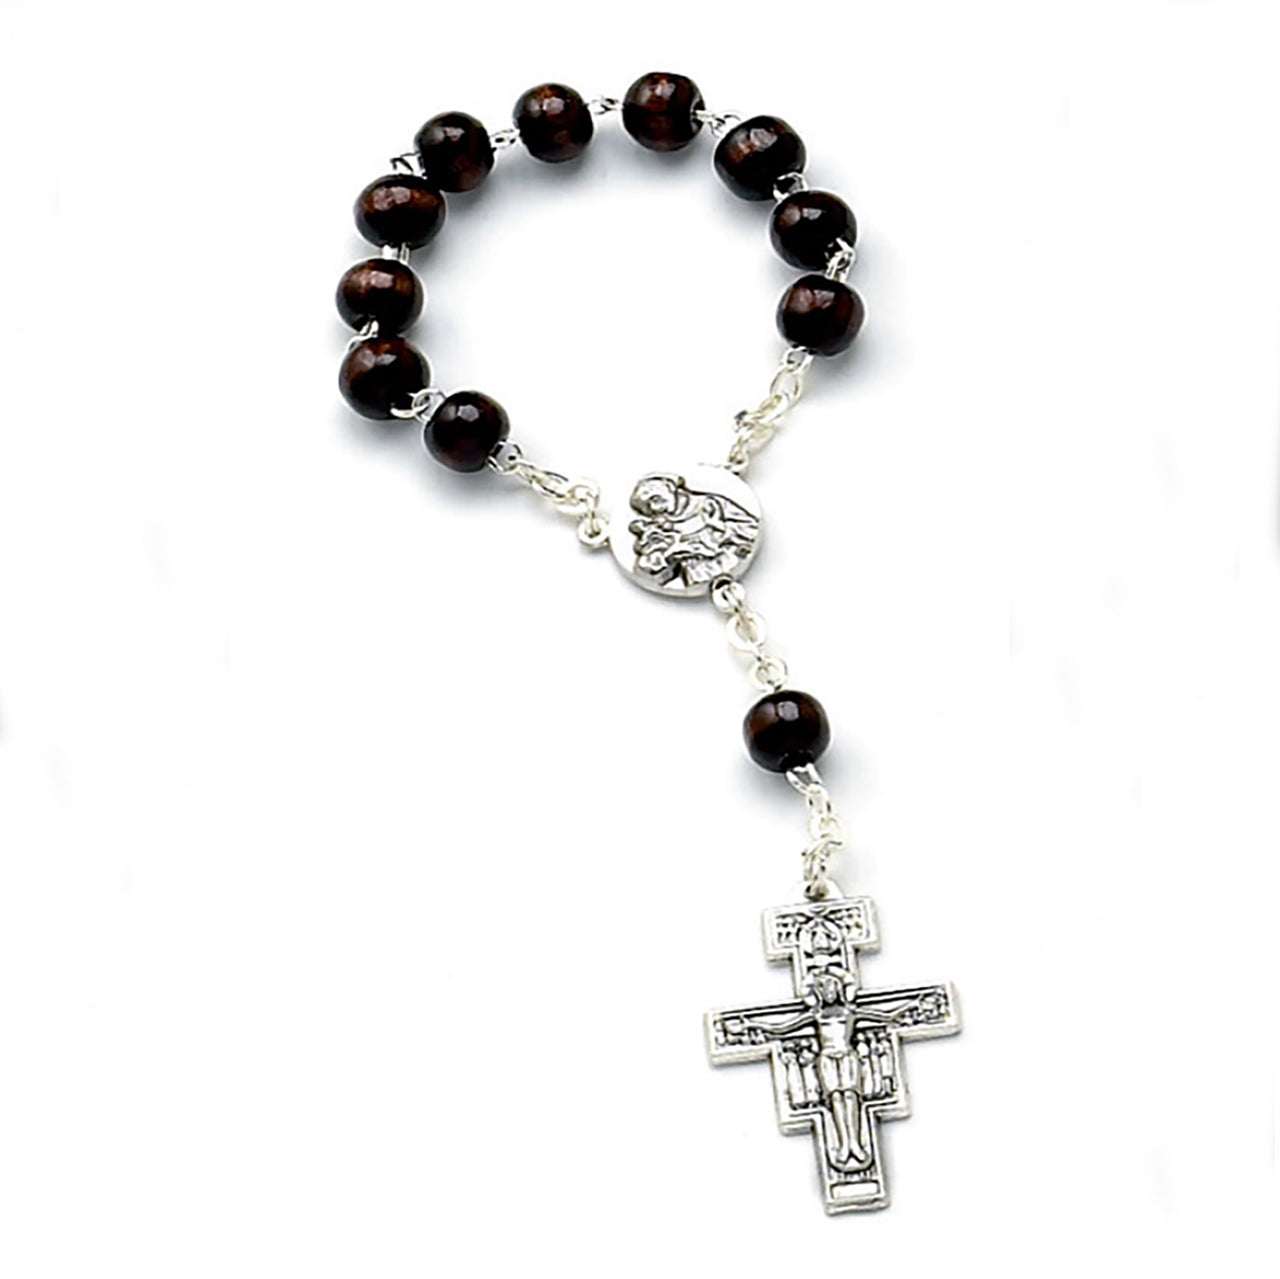 6mm Dark Wood Decade Rosary with St. Francis Center & San Damiano Cross (Packs of 4)